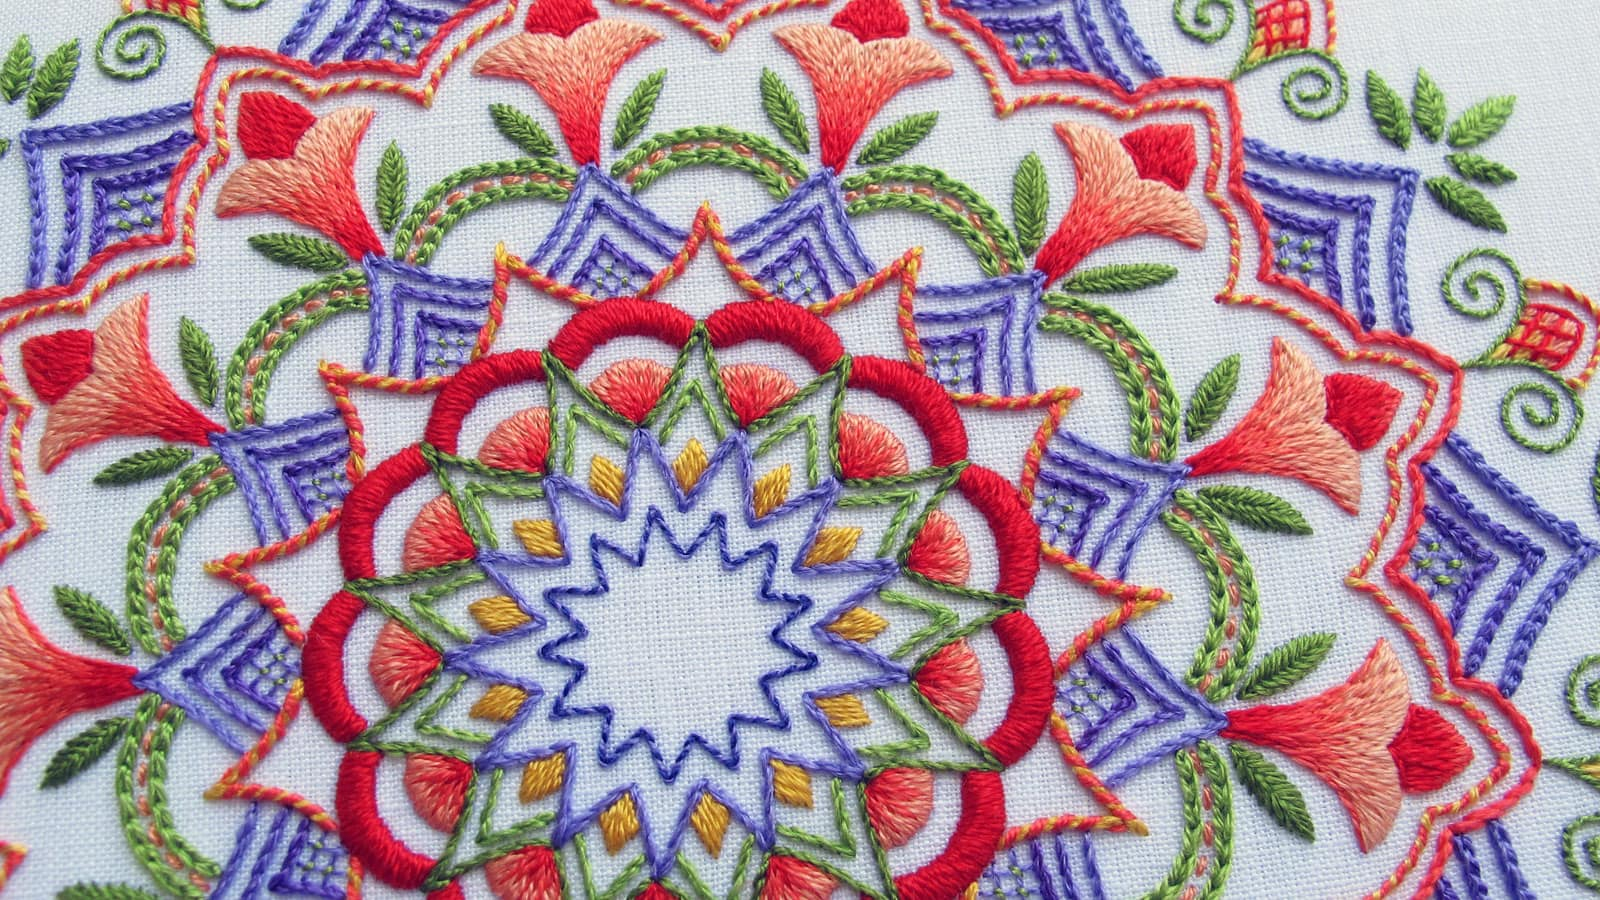 French Embroidery Patterns Needlenthread Tips Tricks And Great Resources For Hand Embroidery